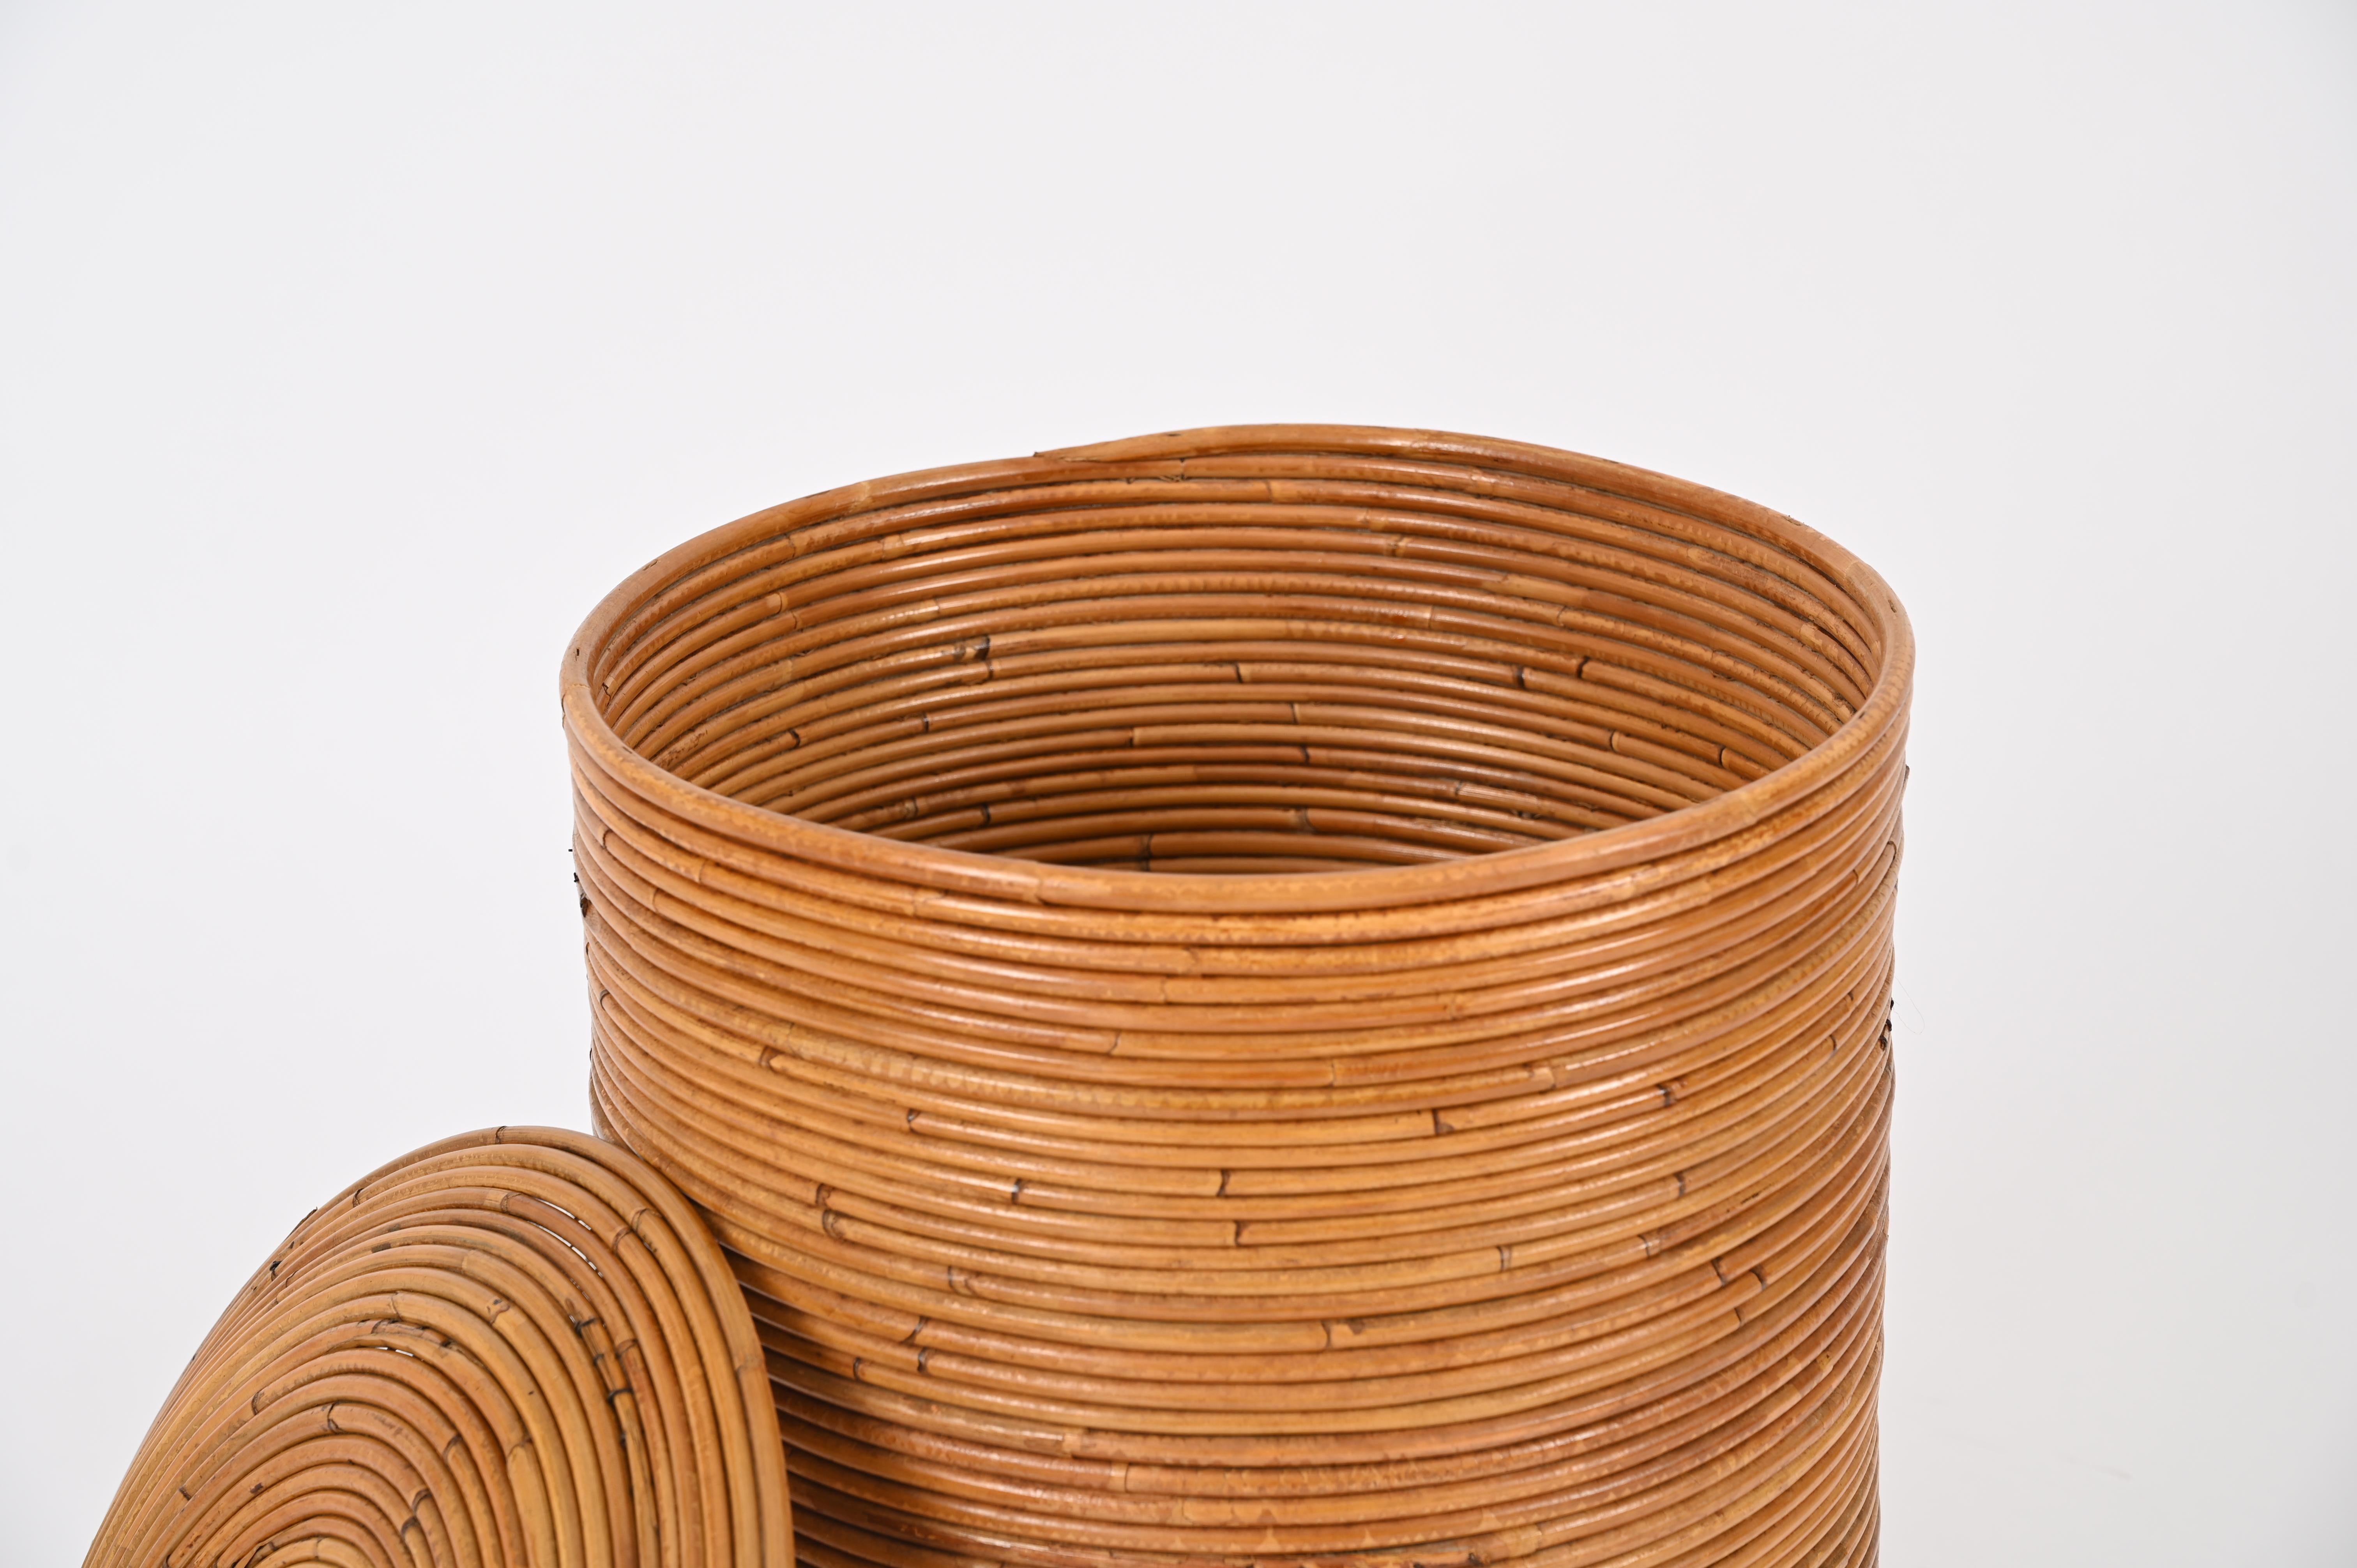 Hand-Crafted French Riviera Large Basket in Curved Rattan by Vivai del Sud, Italy 1970s For Sale